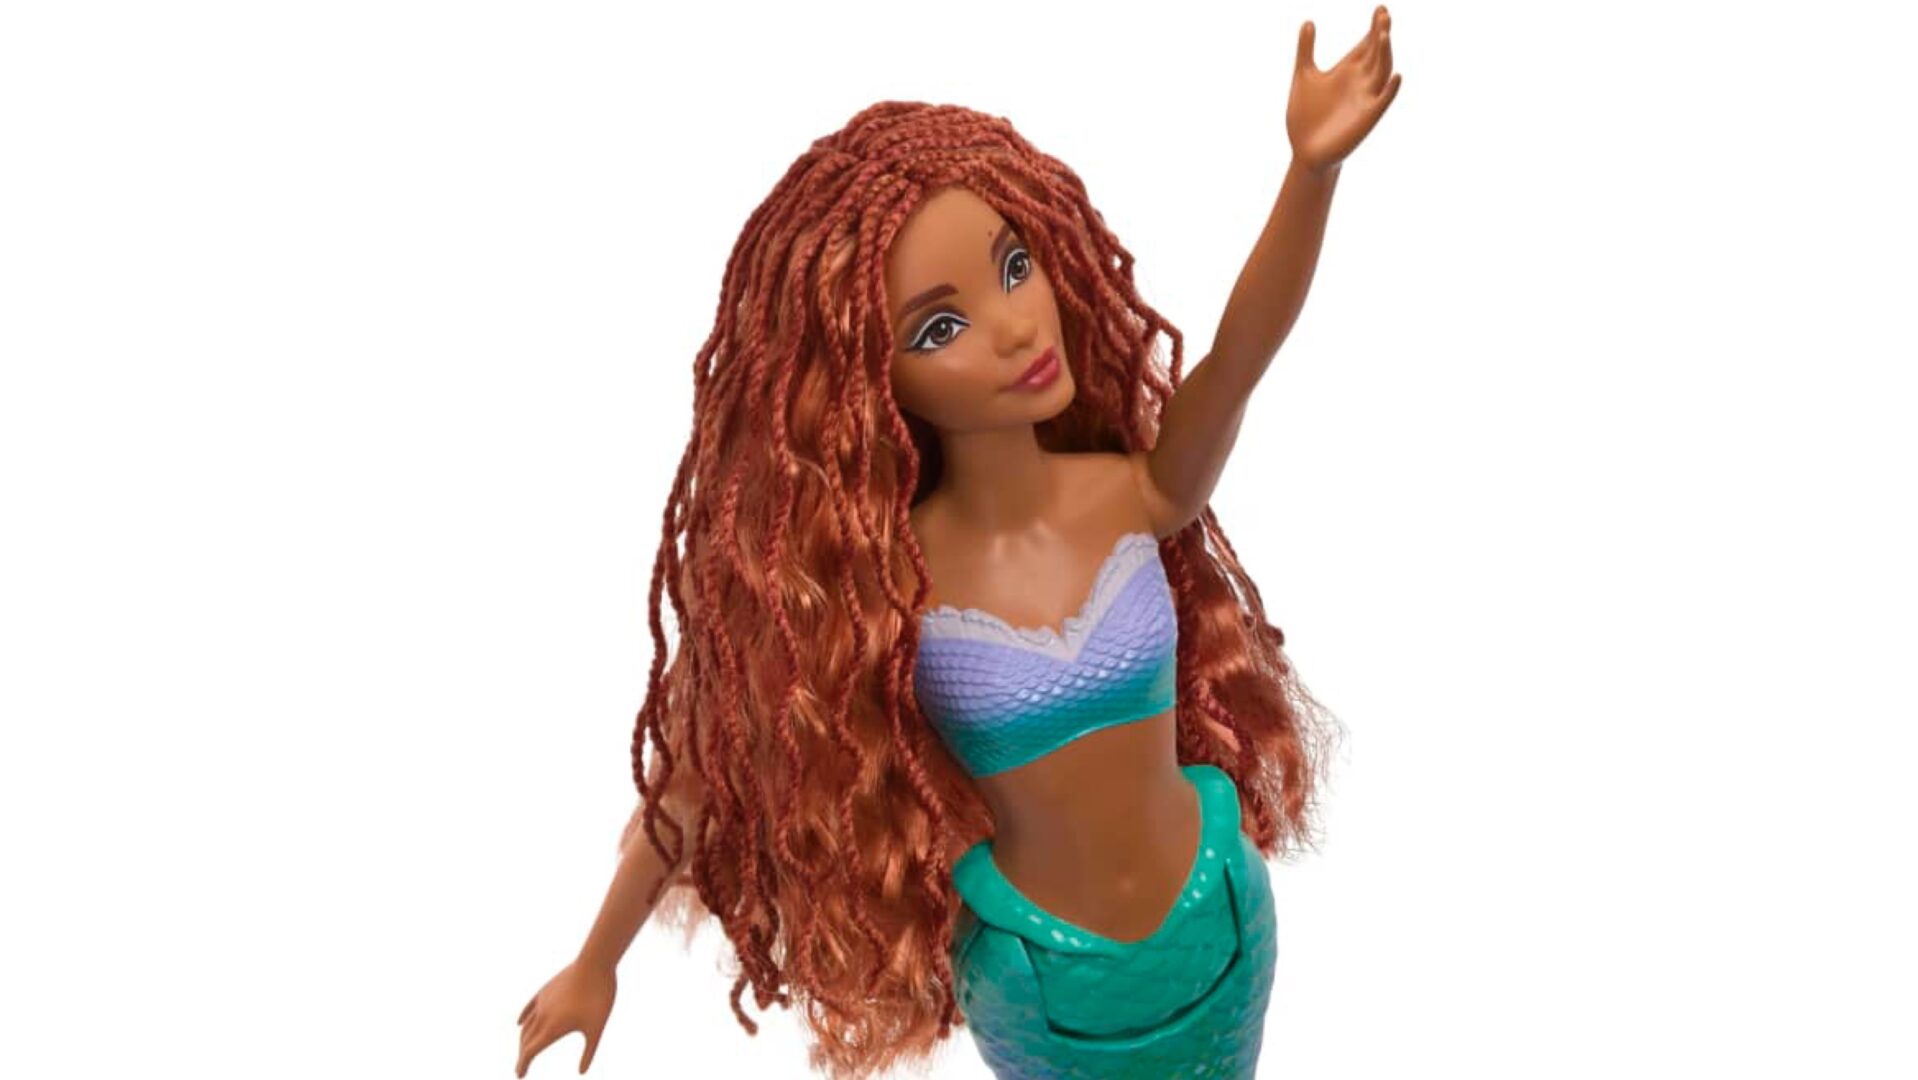 Go Under The Sea Adventures With This Little Mermaid Ariel Doll!